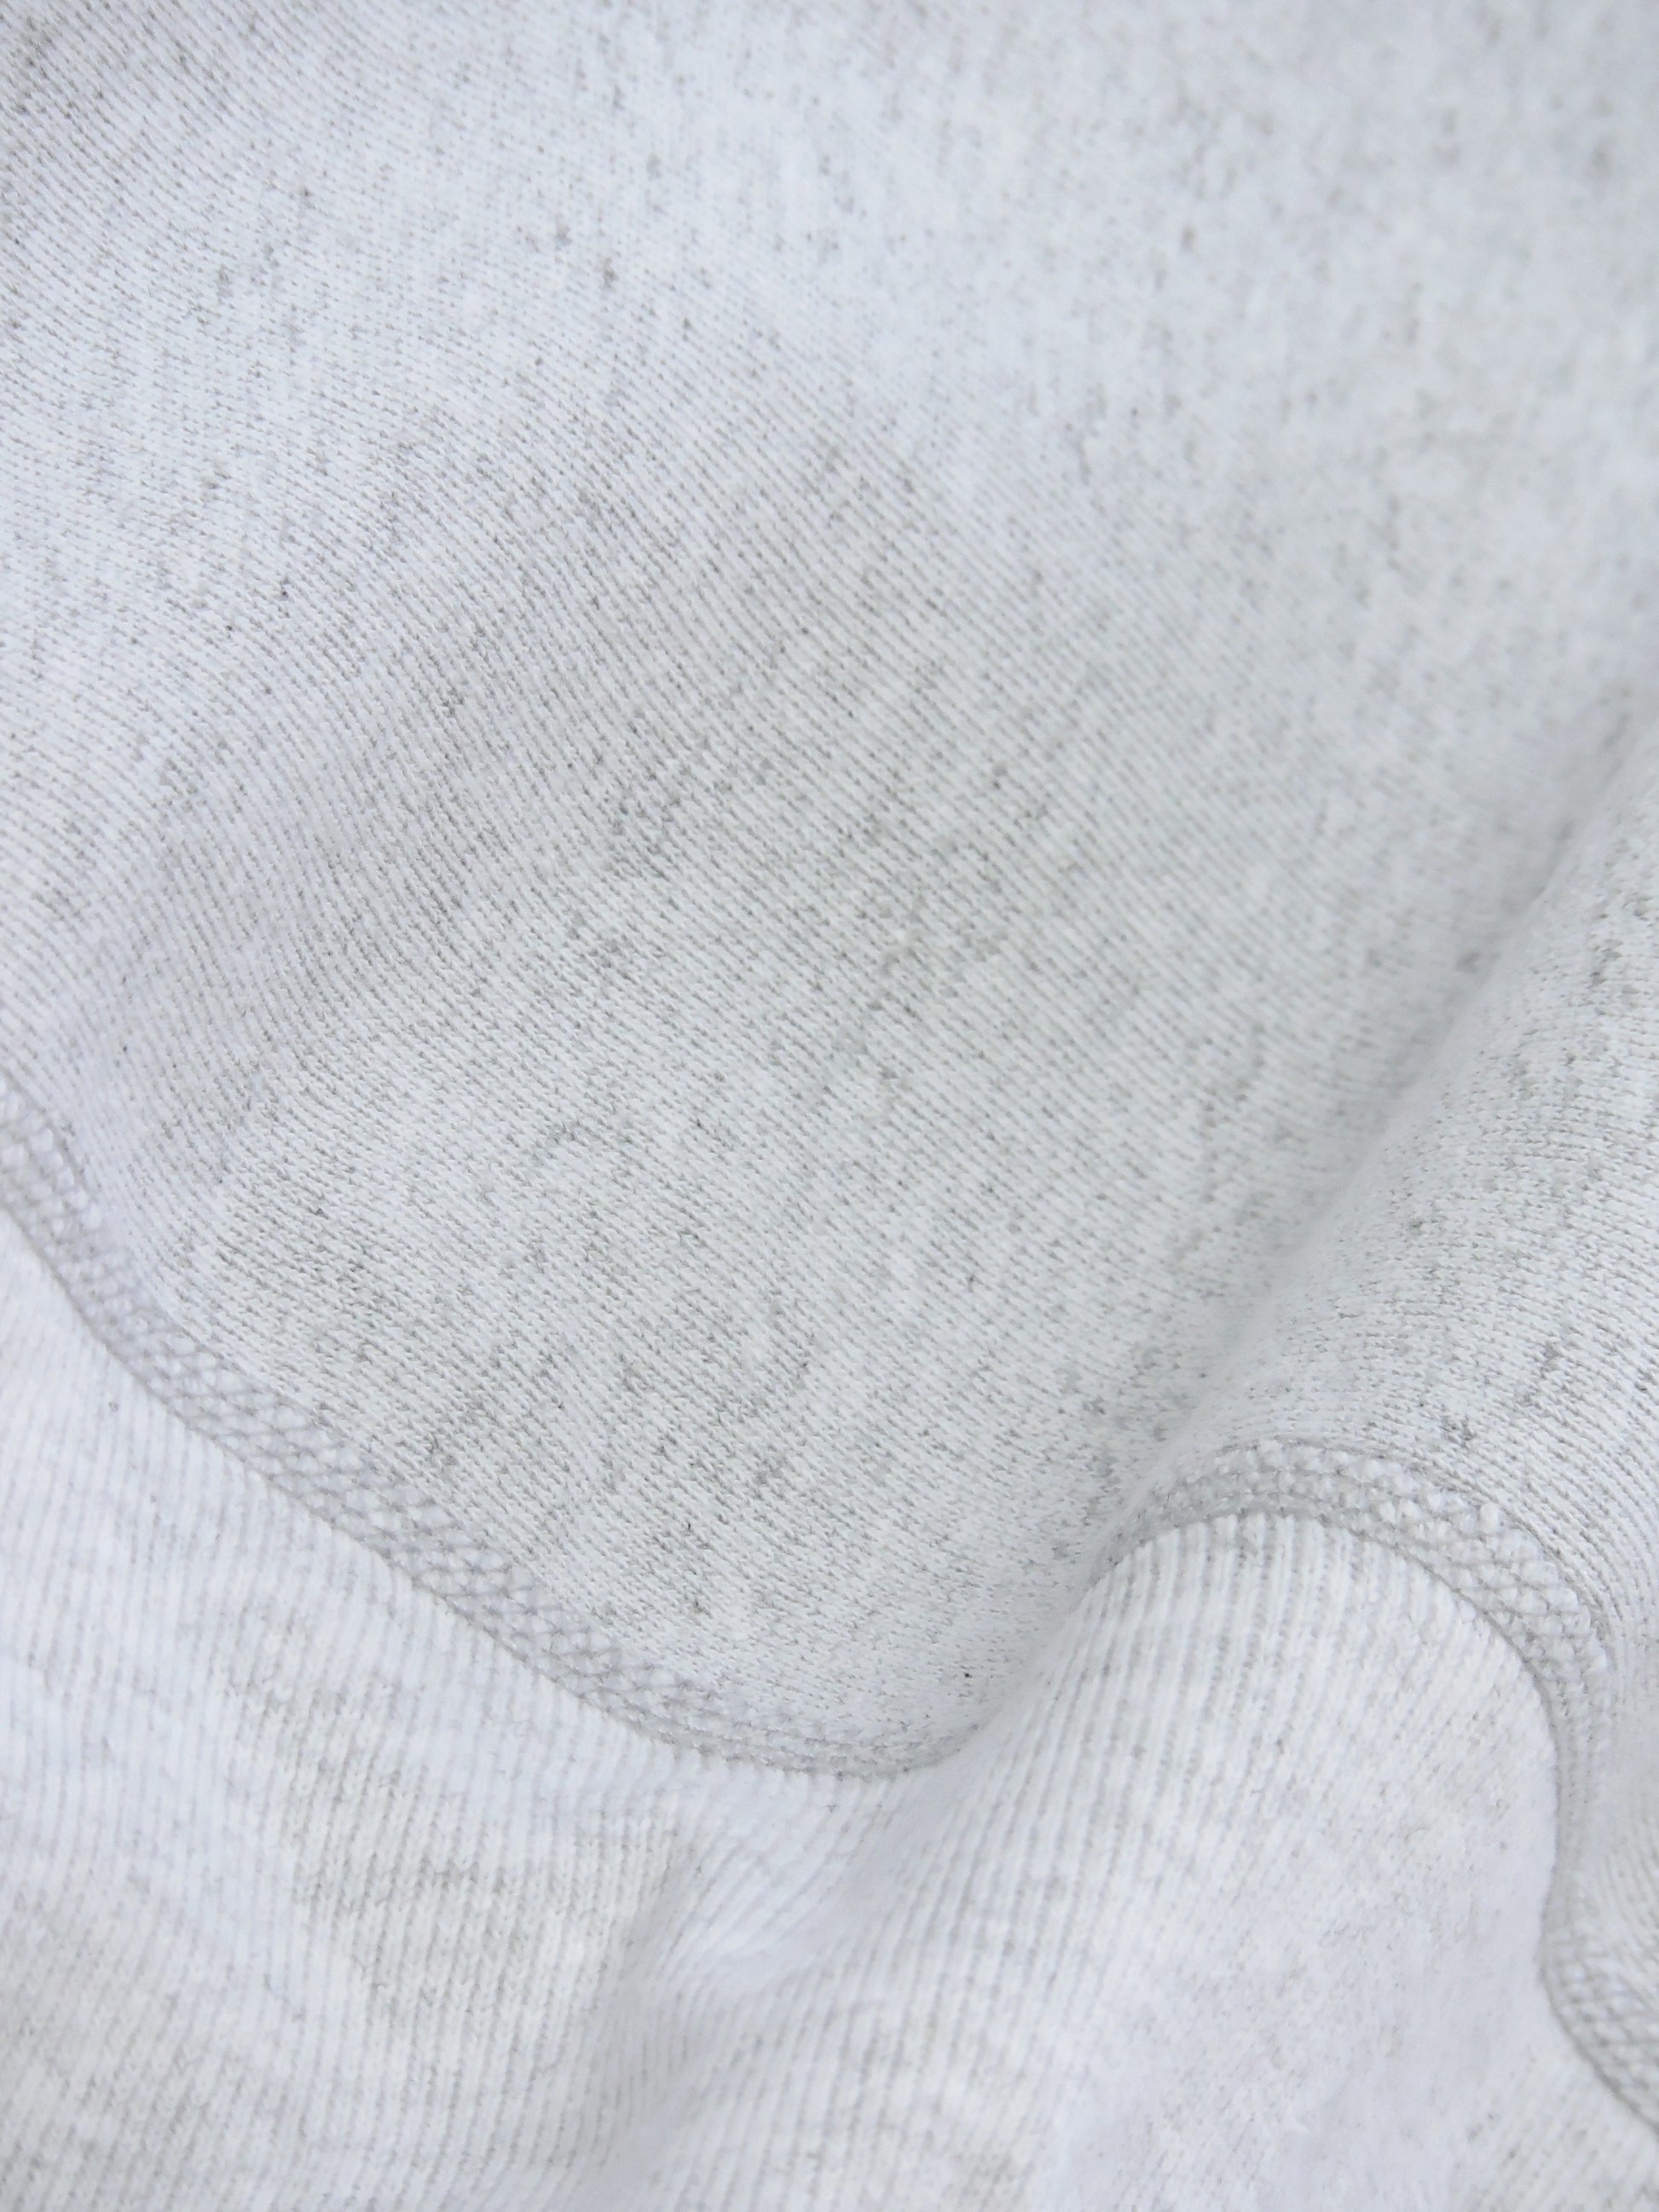 Close up of knitted seams close to the waistband of sweater